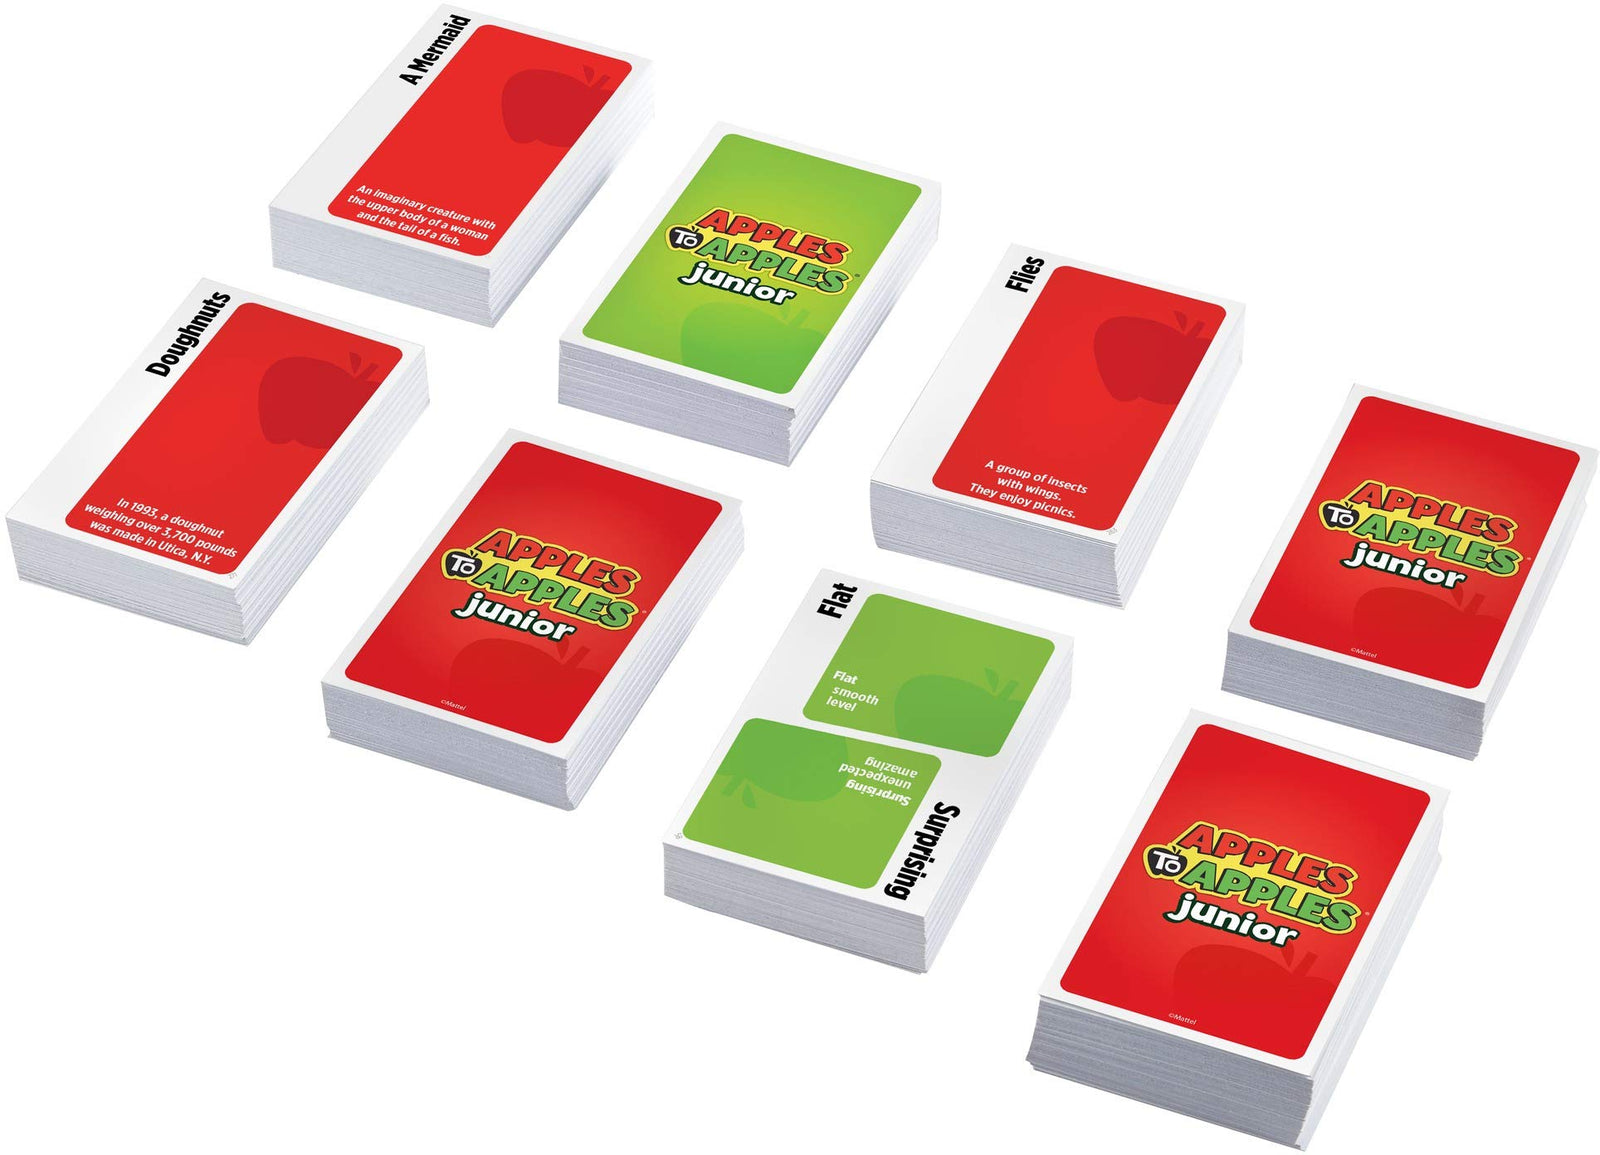 Mattel Apples to Apples Junior, The Game of Crazy Comparisons, Board Game with 504 Cards, Family Party Game Especially for Kids, Gift for Kid, Teen & Family Game Night Ages 9 Years & Older